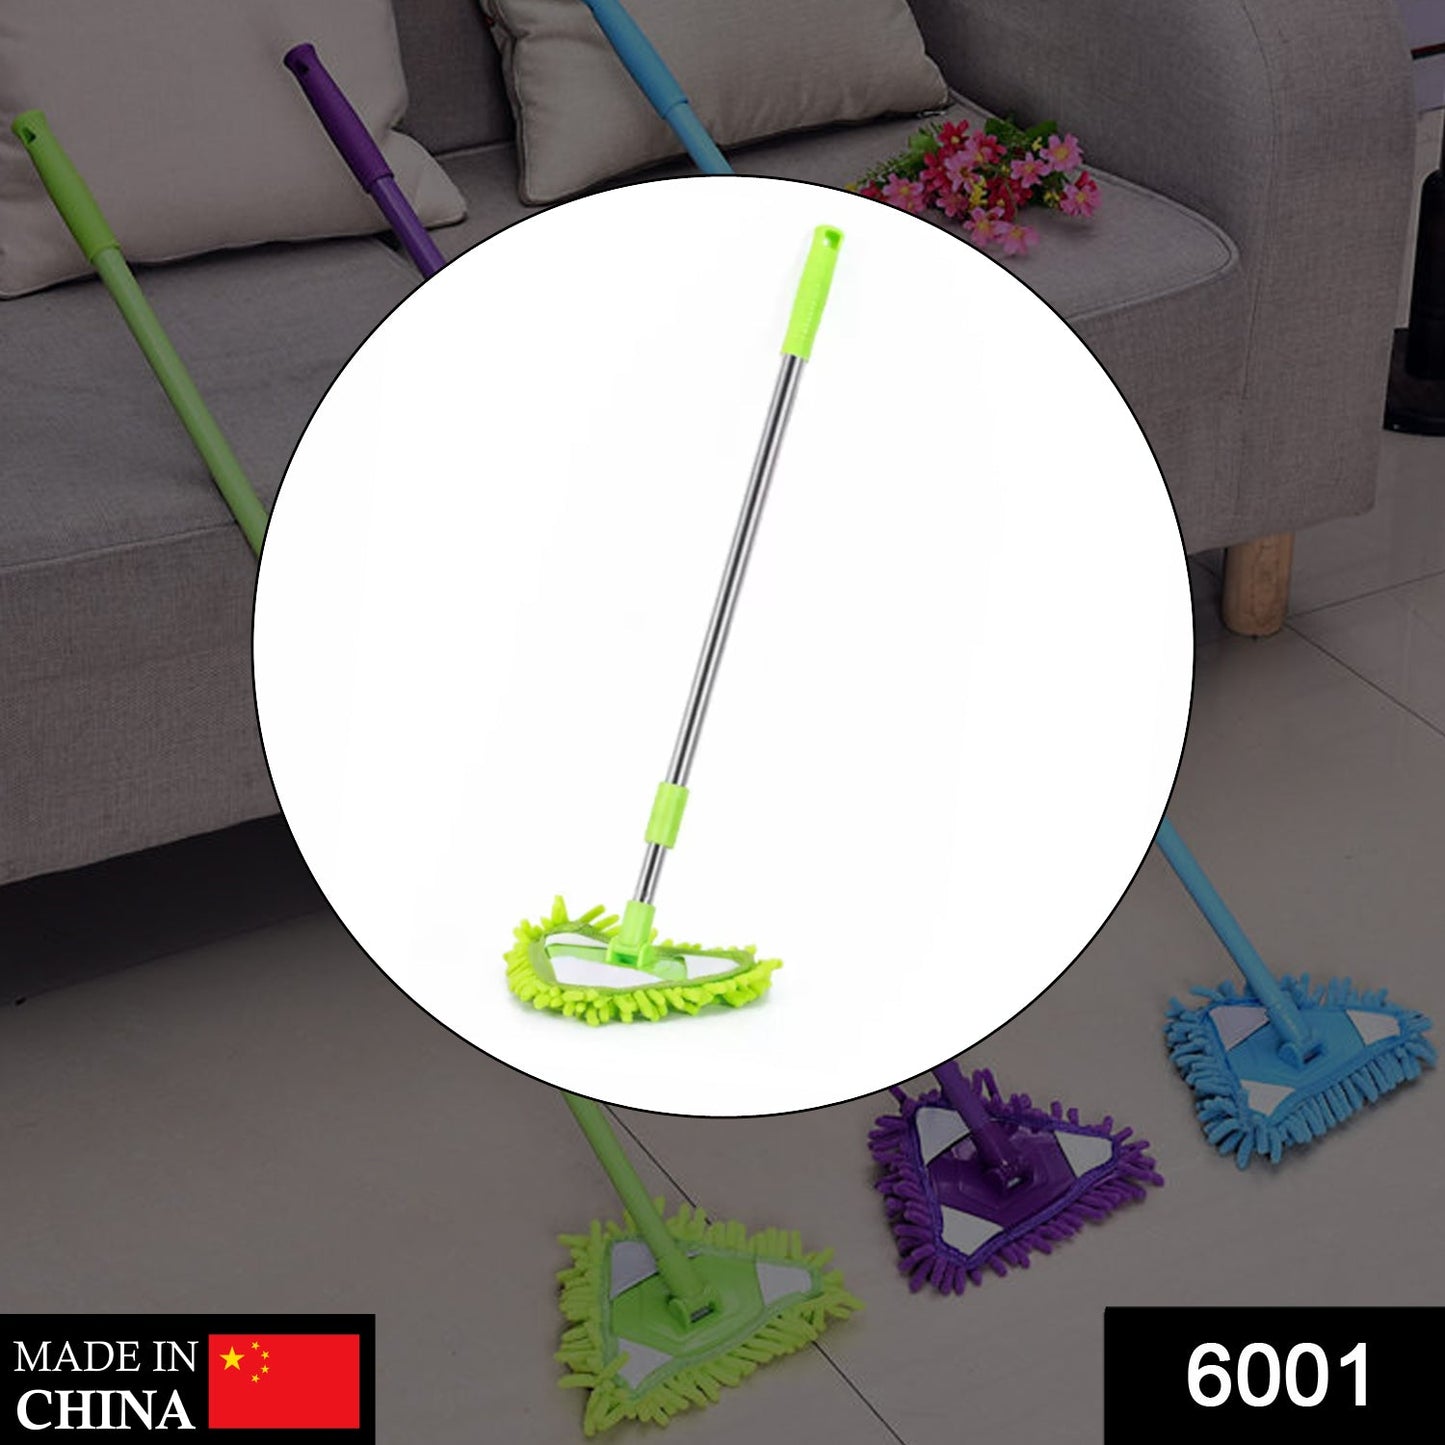 6001 Stainless Steel Road Adjustable Triangle Mop Used for Cleaning Dusty and Wet Floor Surfaces and Tiles. 